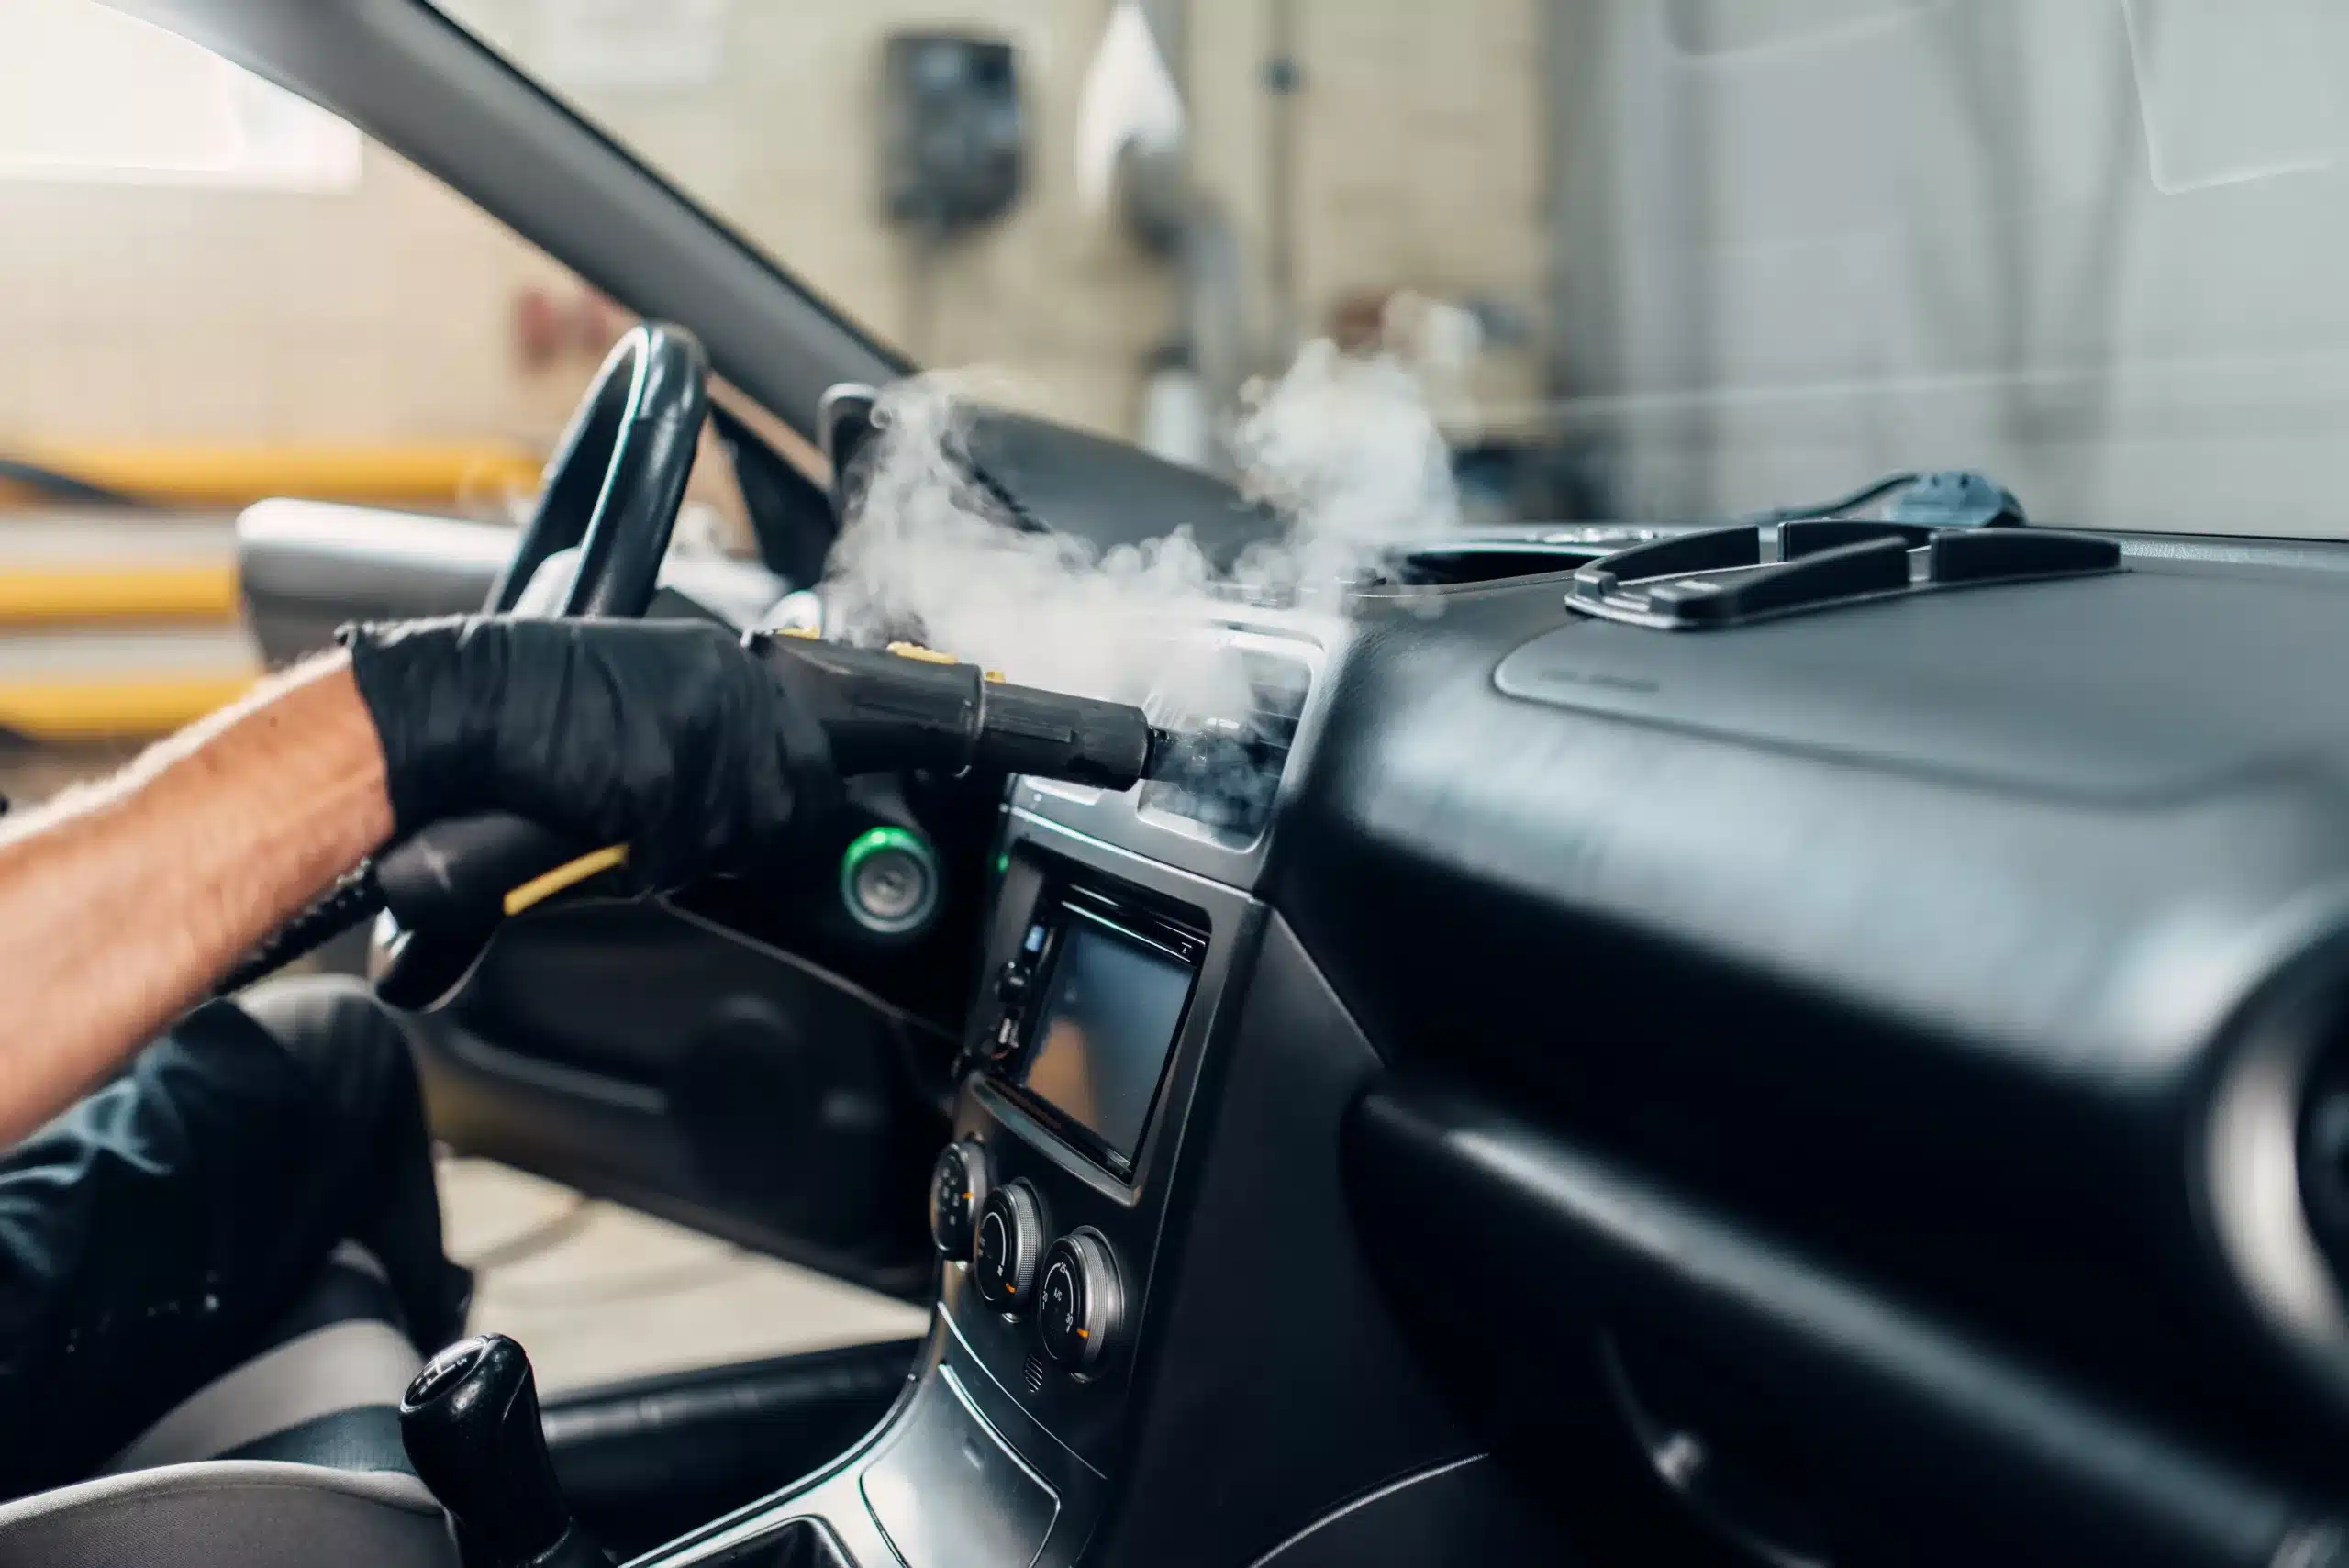 Steam cleaning interiors of cars